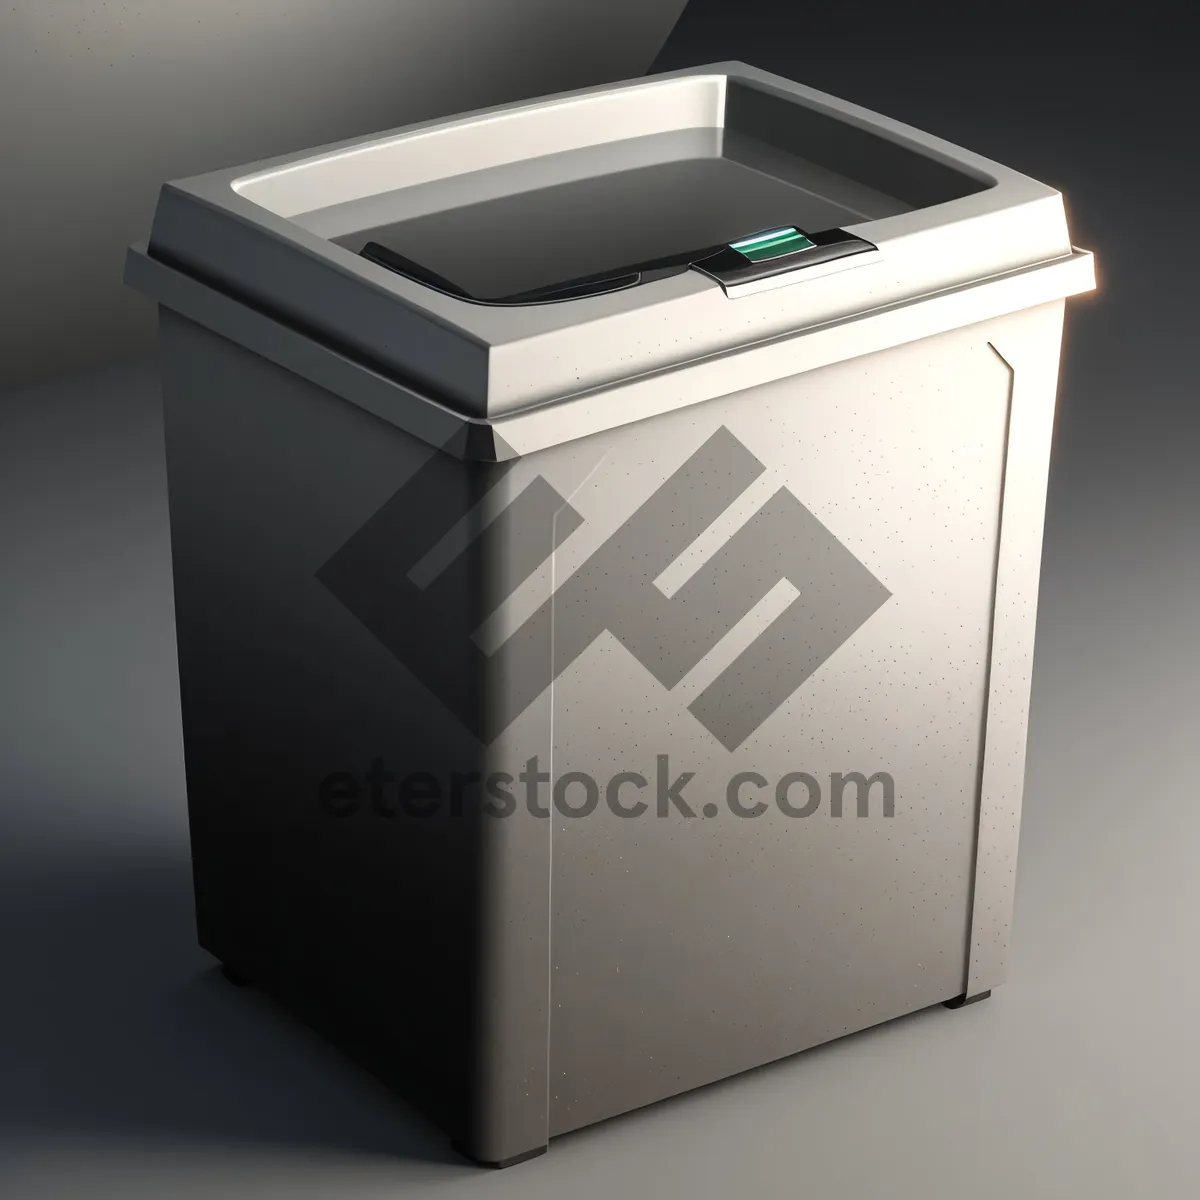 Picture of White Goods Shredder - Efficient Home Appliance for Recycling